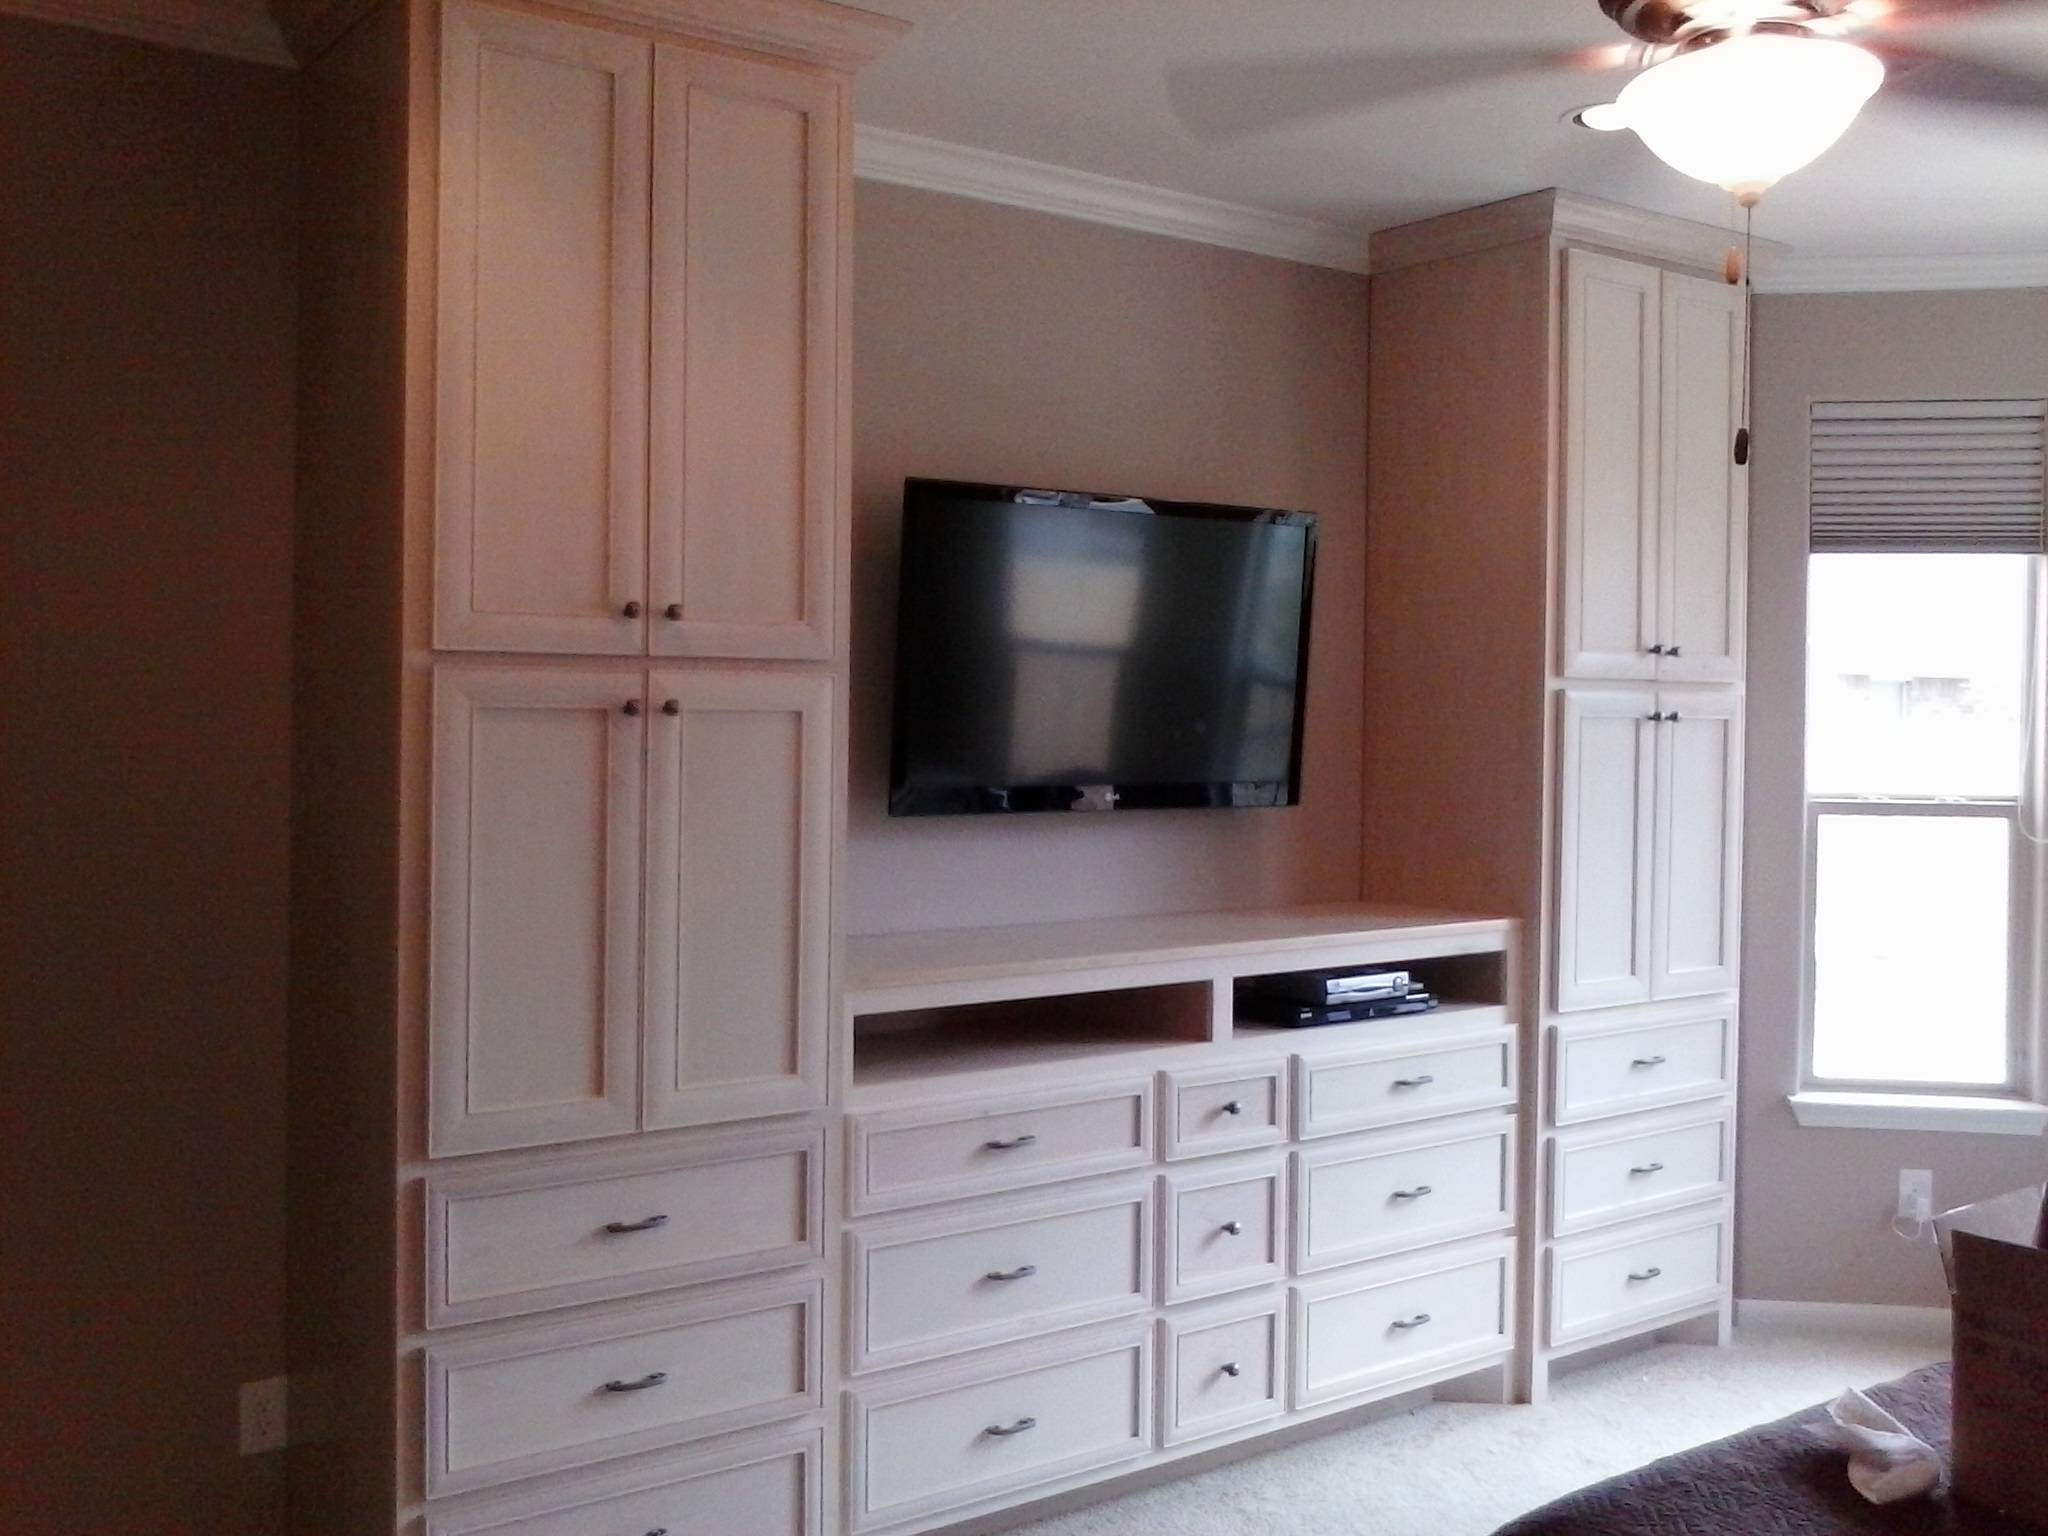 Bedroom Wall Units With Drawers
 30 Best Collection of Double Wardrobe With Drawers and Shelves